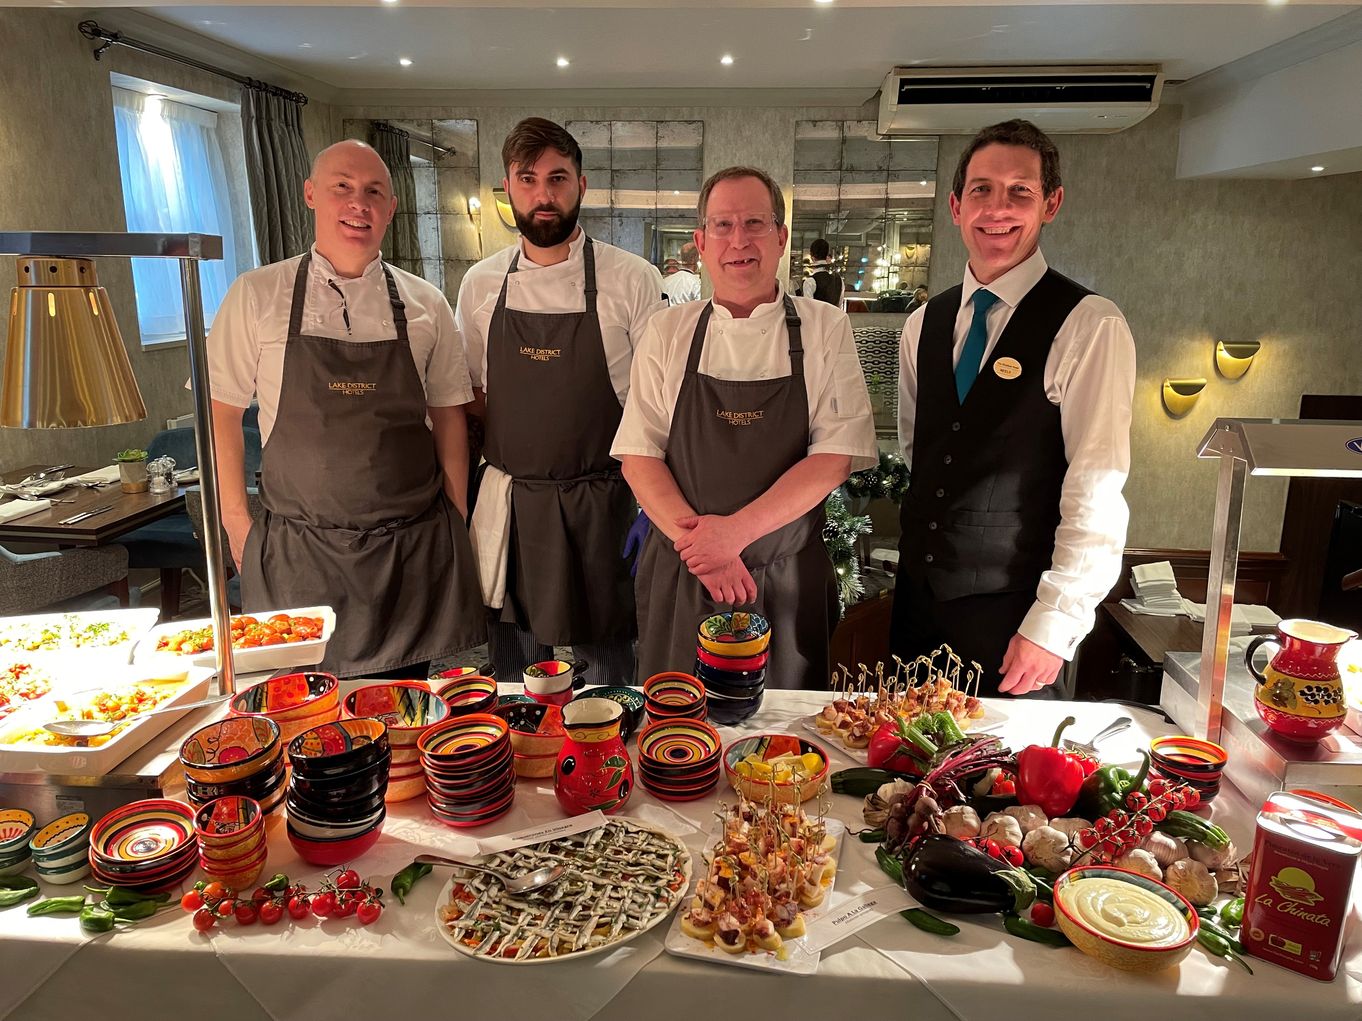 Left to right: Lake District Hotels Executive Chef, Mark Harris; Ionut Rolea, Skiddaw Hotel Sous Chef; Bobby Fillingham, Skiddaw Hotel Head Chef & Neels Ferreira, Skiddaw Hotel General Manager.